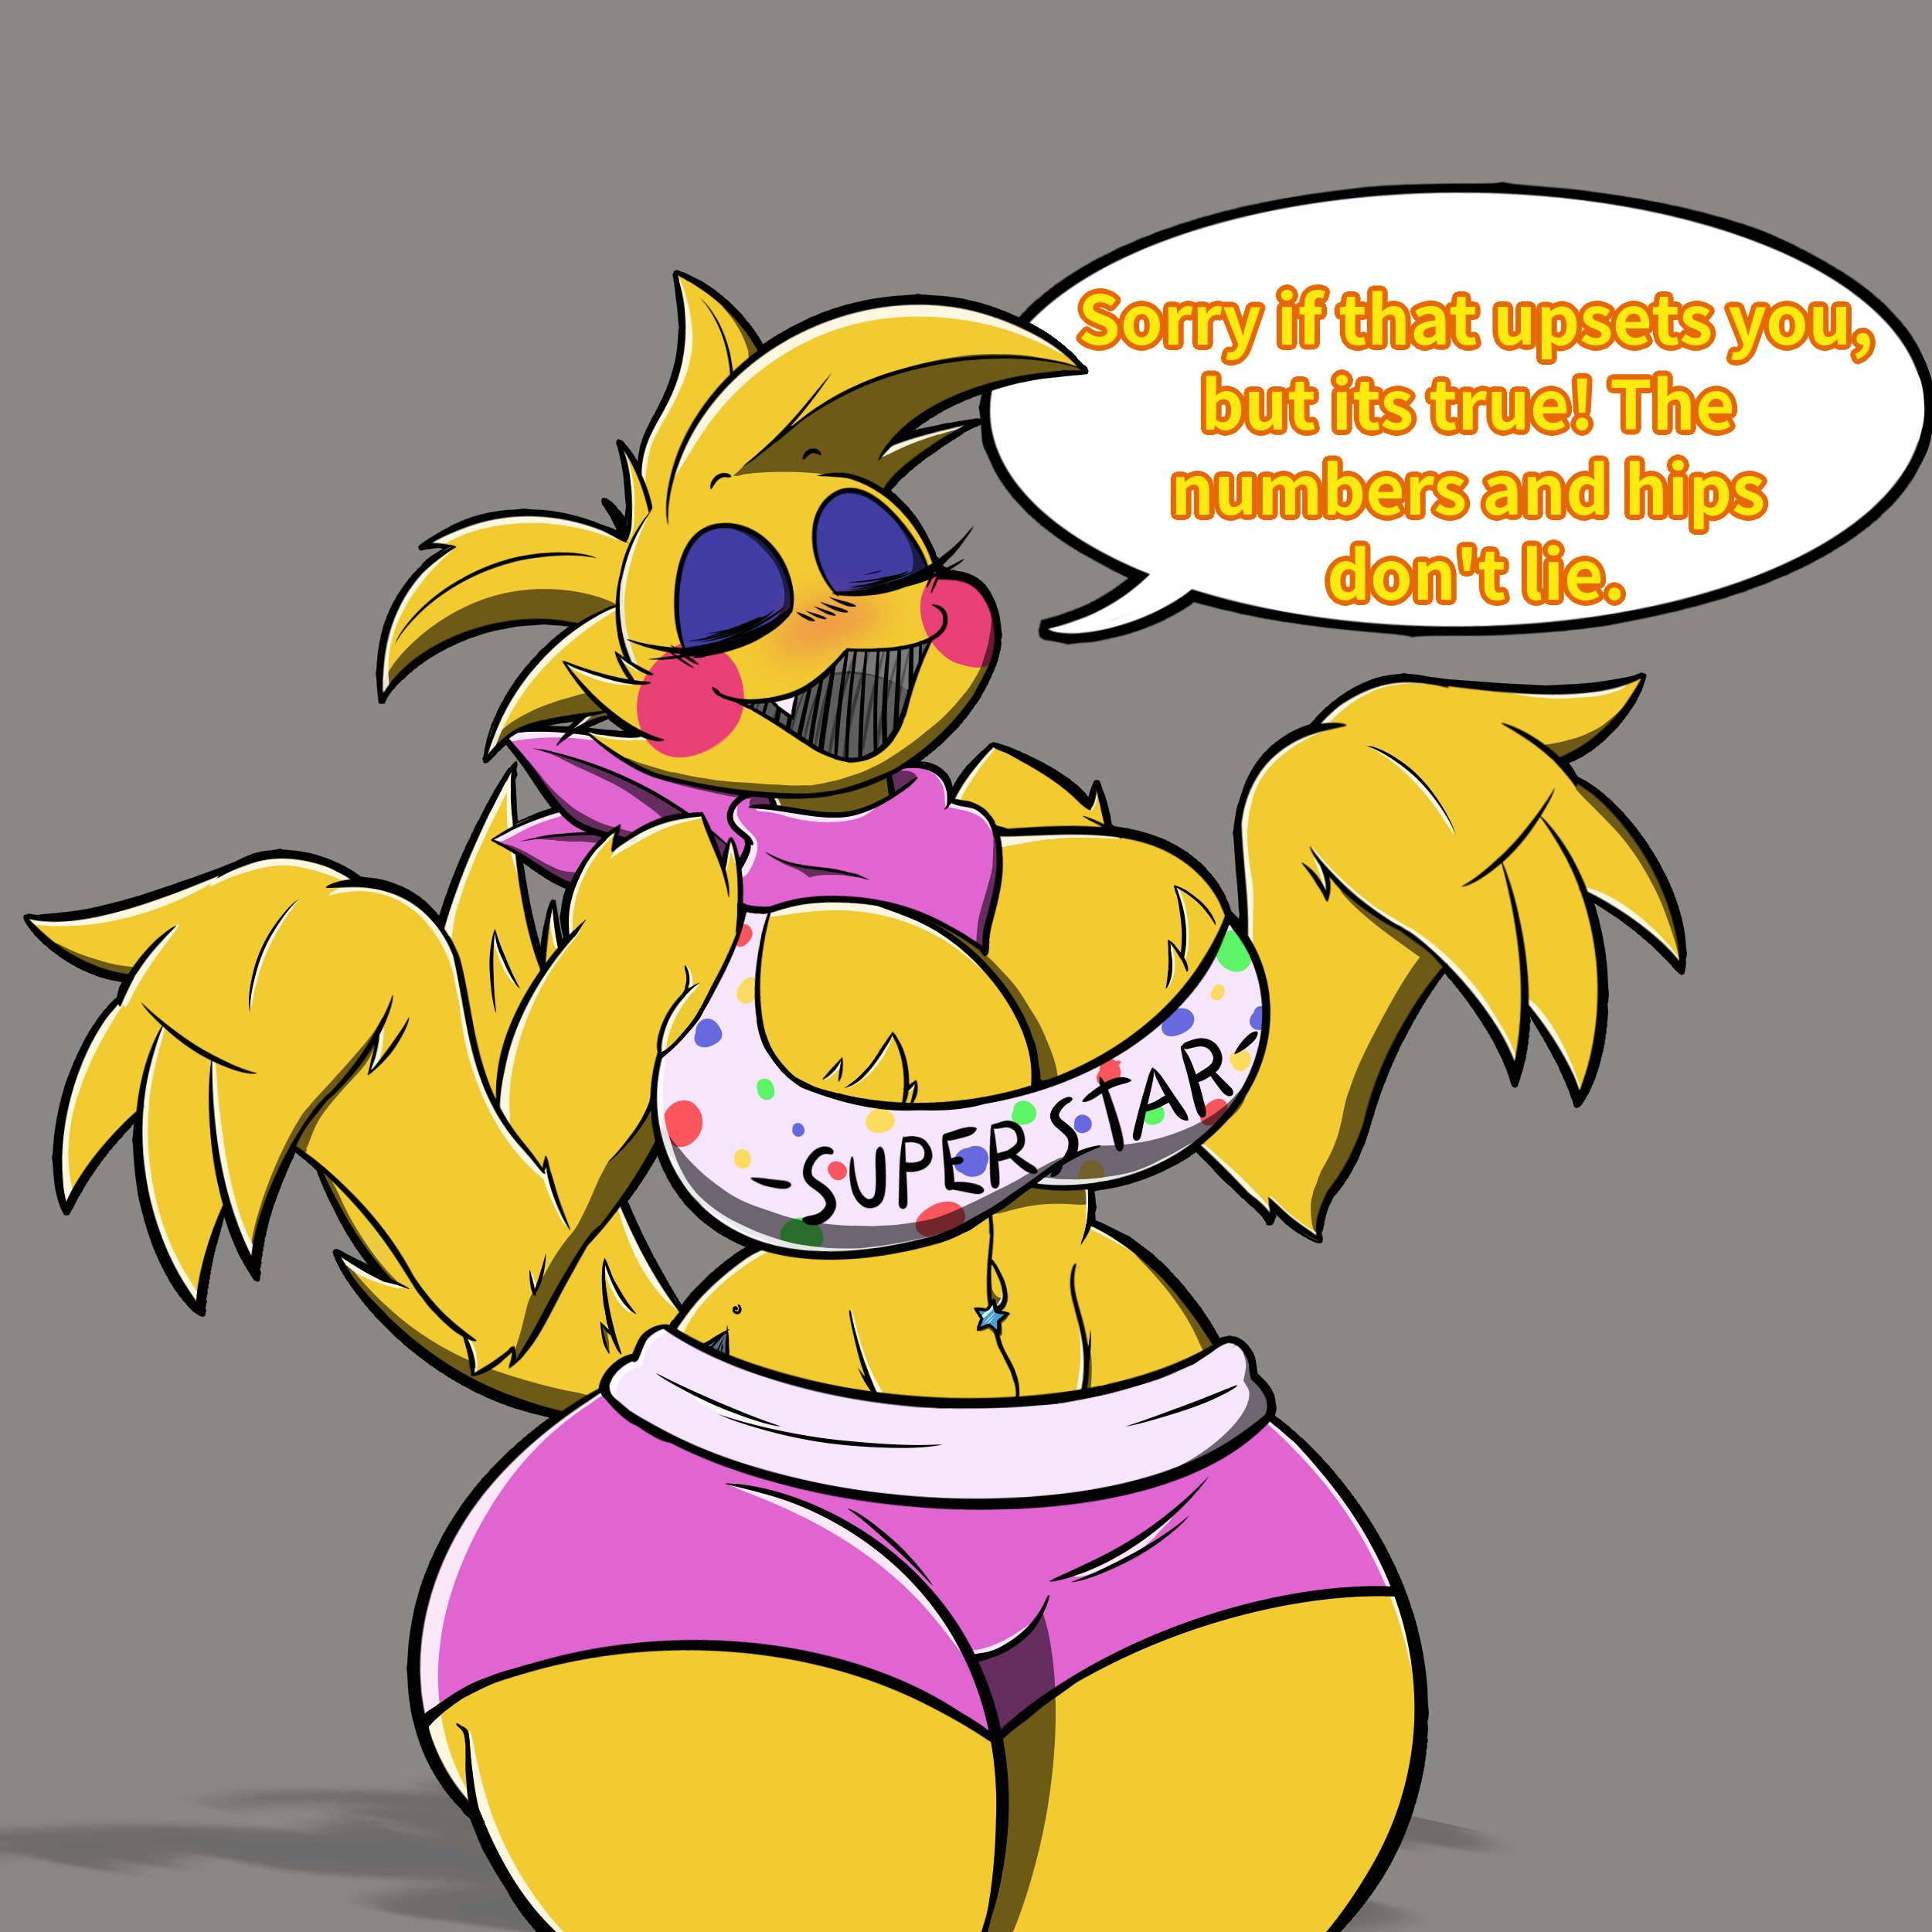 Discover the erotic art of toy chica with rule 34.